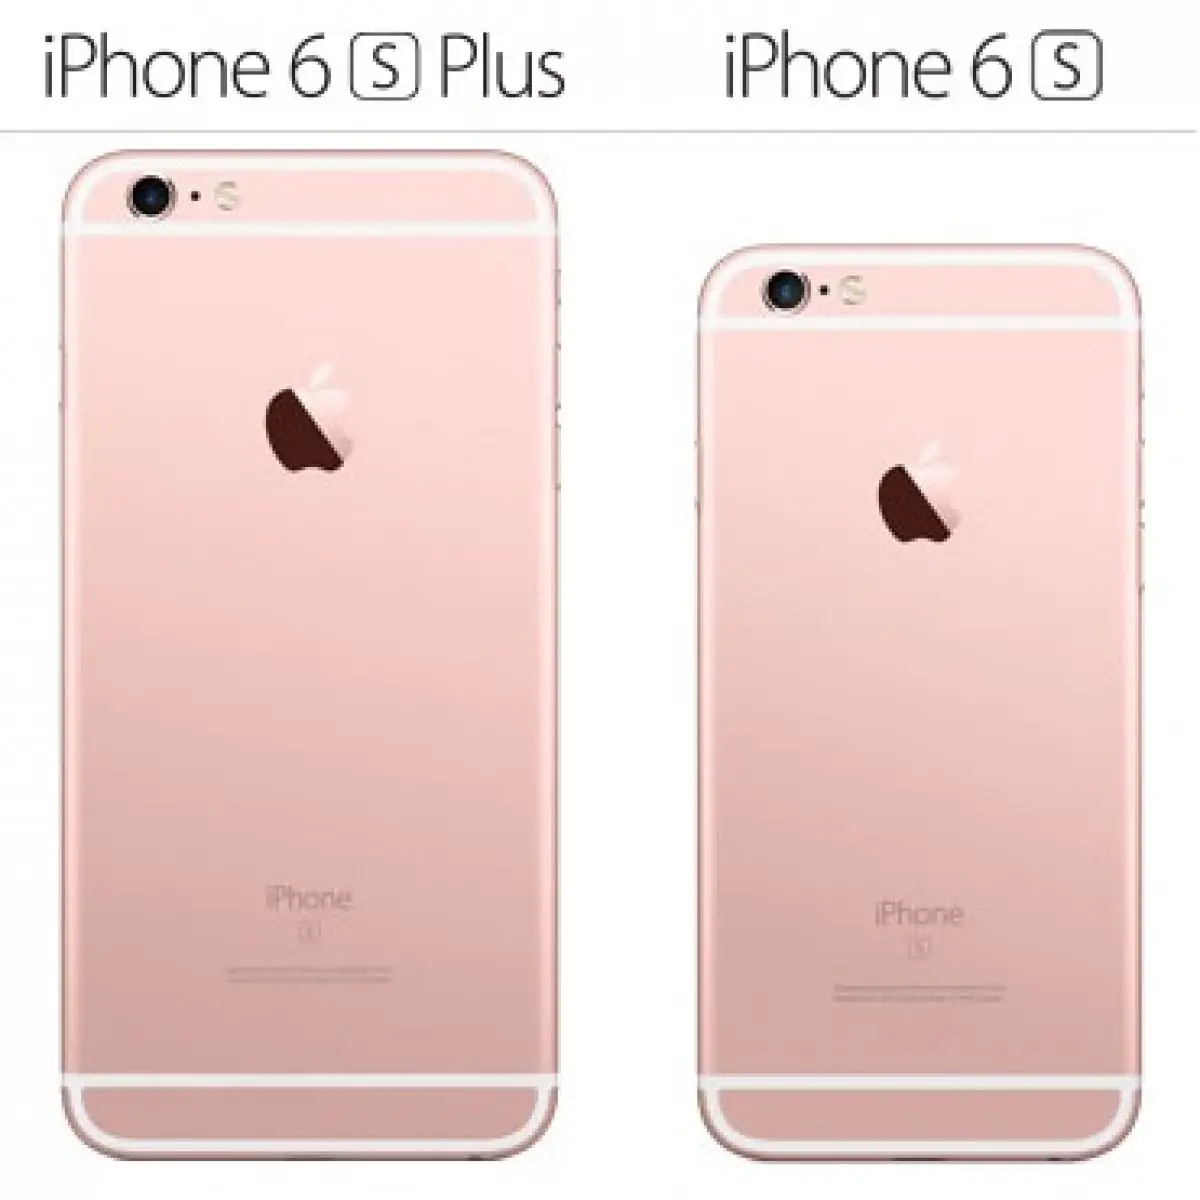 Væk Il At sige sandheden iPhone 6S or iPhone 6S Plus? Pros and Cons!